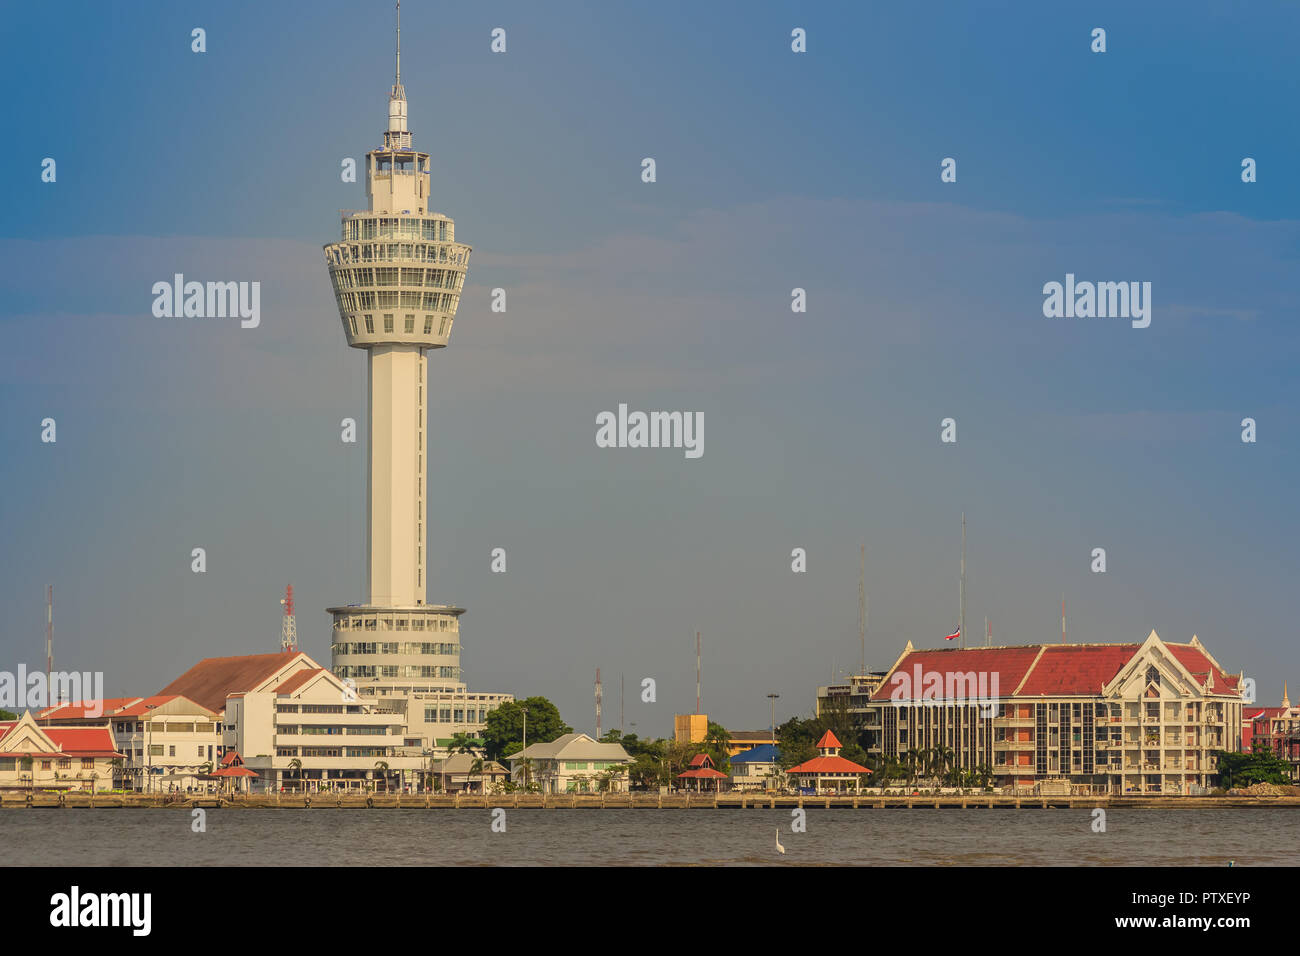 Riverfront View Of Samut Prakan City Hall With New Observation Tower And Boat Pier Samut Prakan Is At The Mouth Of The Chao Phraya River On Gulf Of T Stock Photo